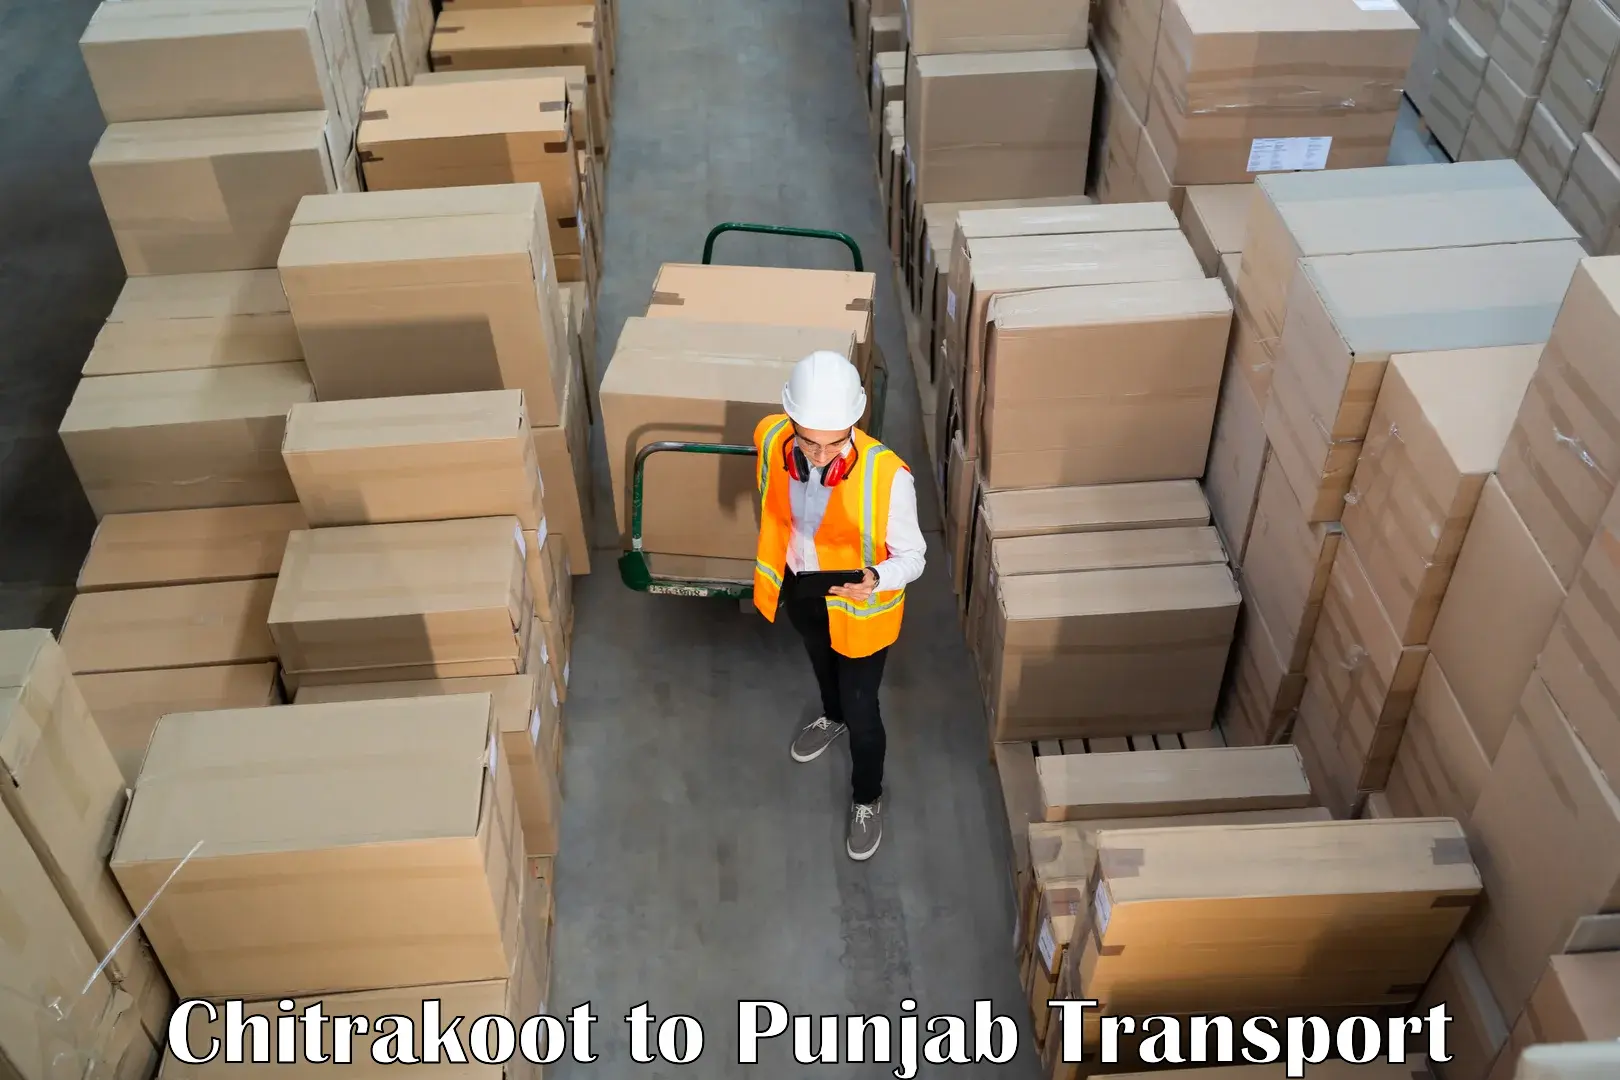 Air freight transport services Chitrakoot to Dharamkot